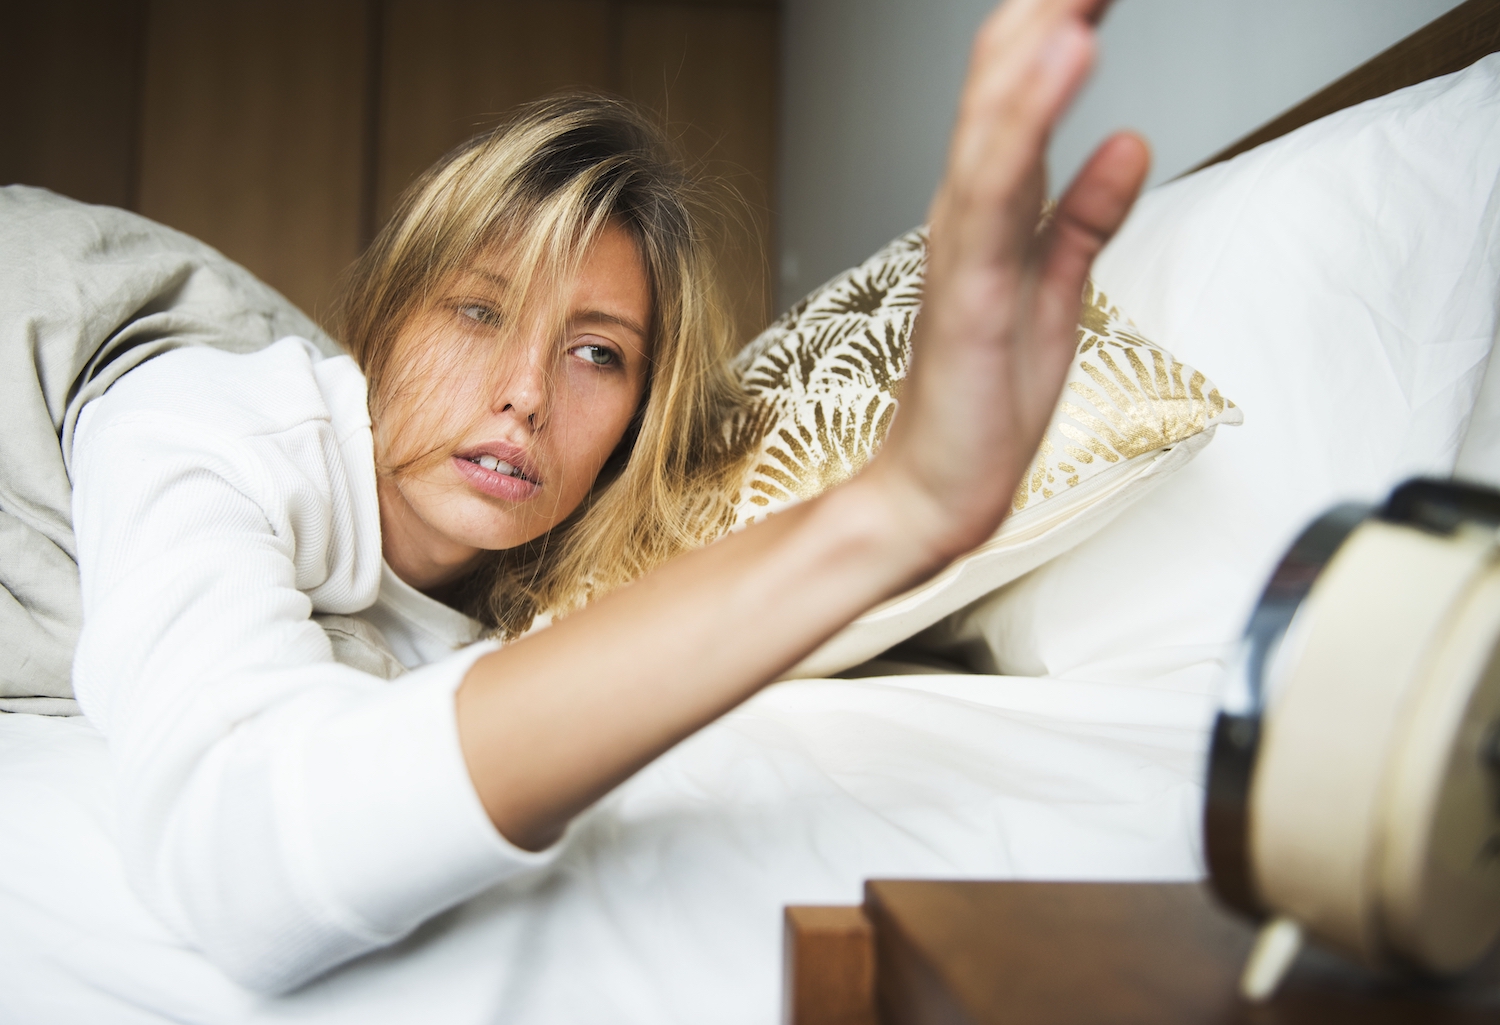 A blonde woman sleepily turns off her alarm clock